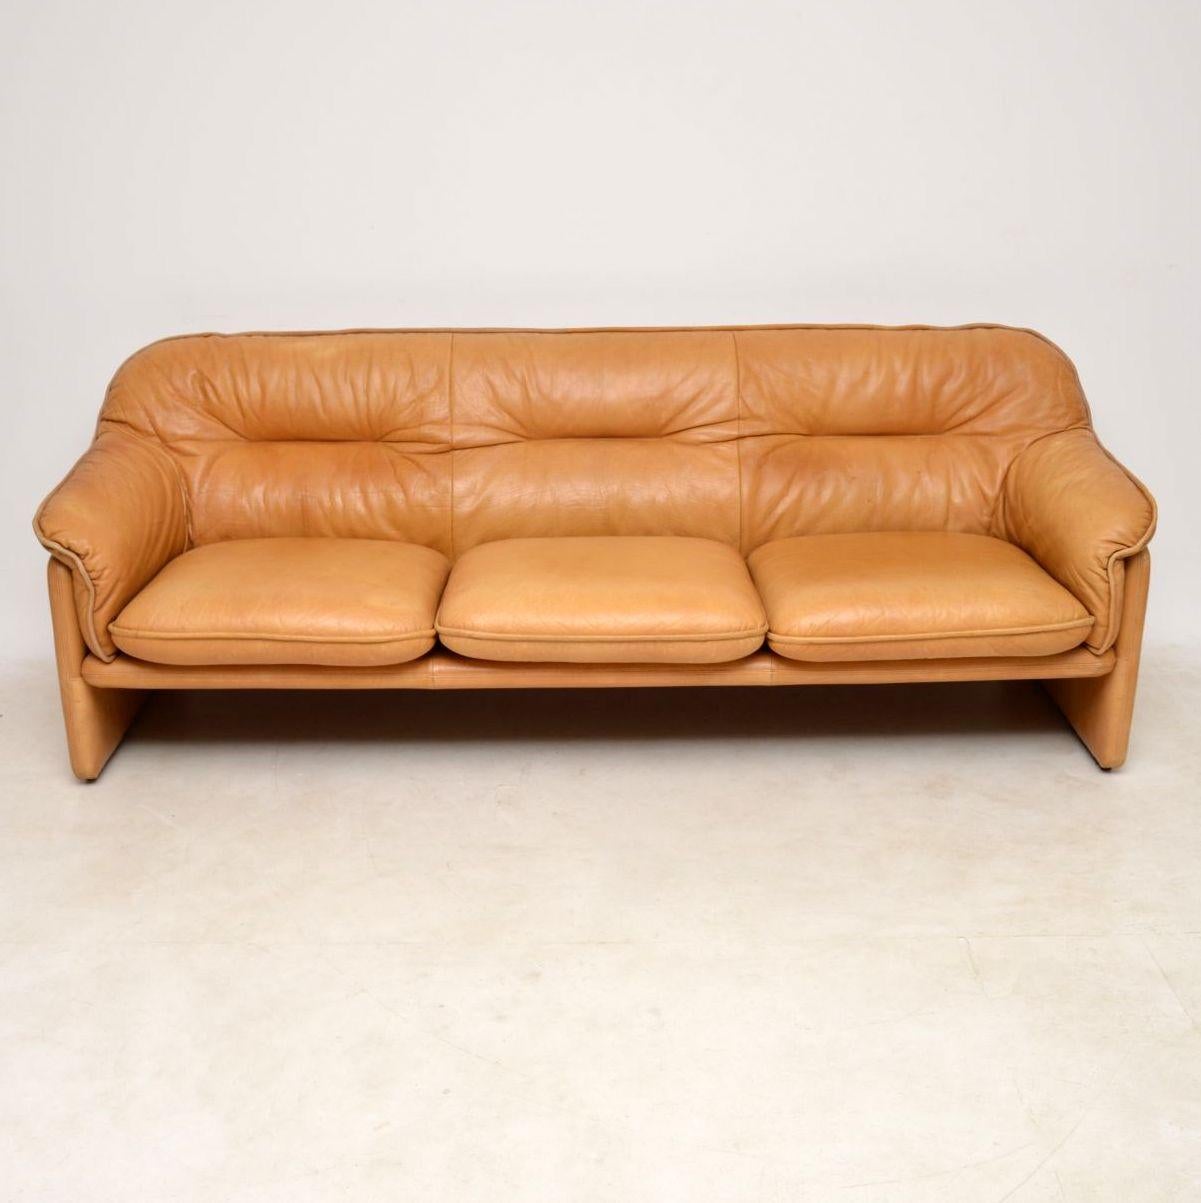 An absolutely stunning, top quality and extremely comfortable leather sofa, this was made in Switzerland by the high end company De Sede, it dates from the 1960s-1970s. The tanned leather is beautifully soft and smooth, the condition is lovely, with